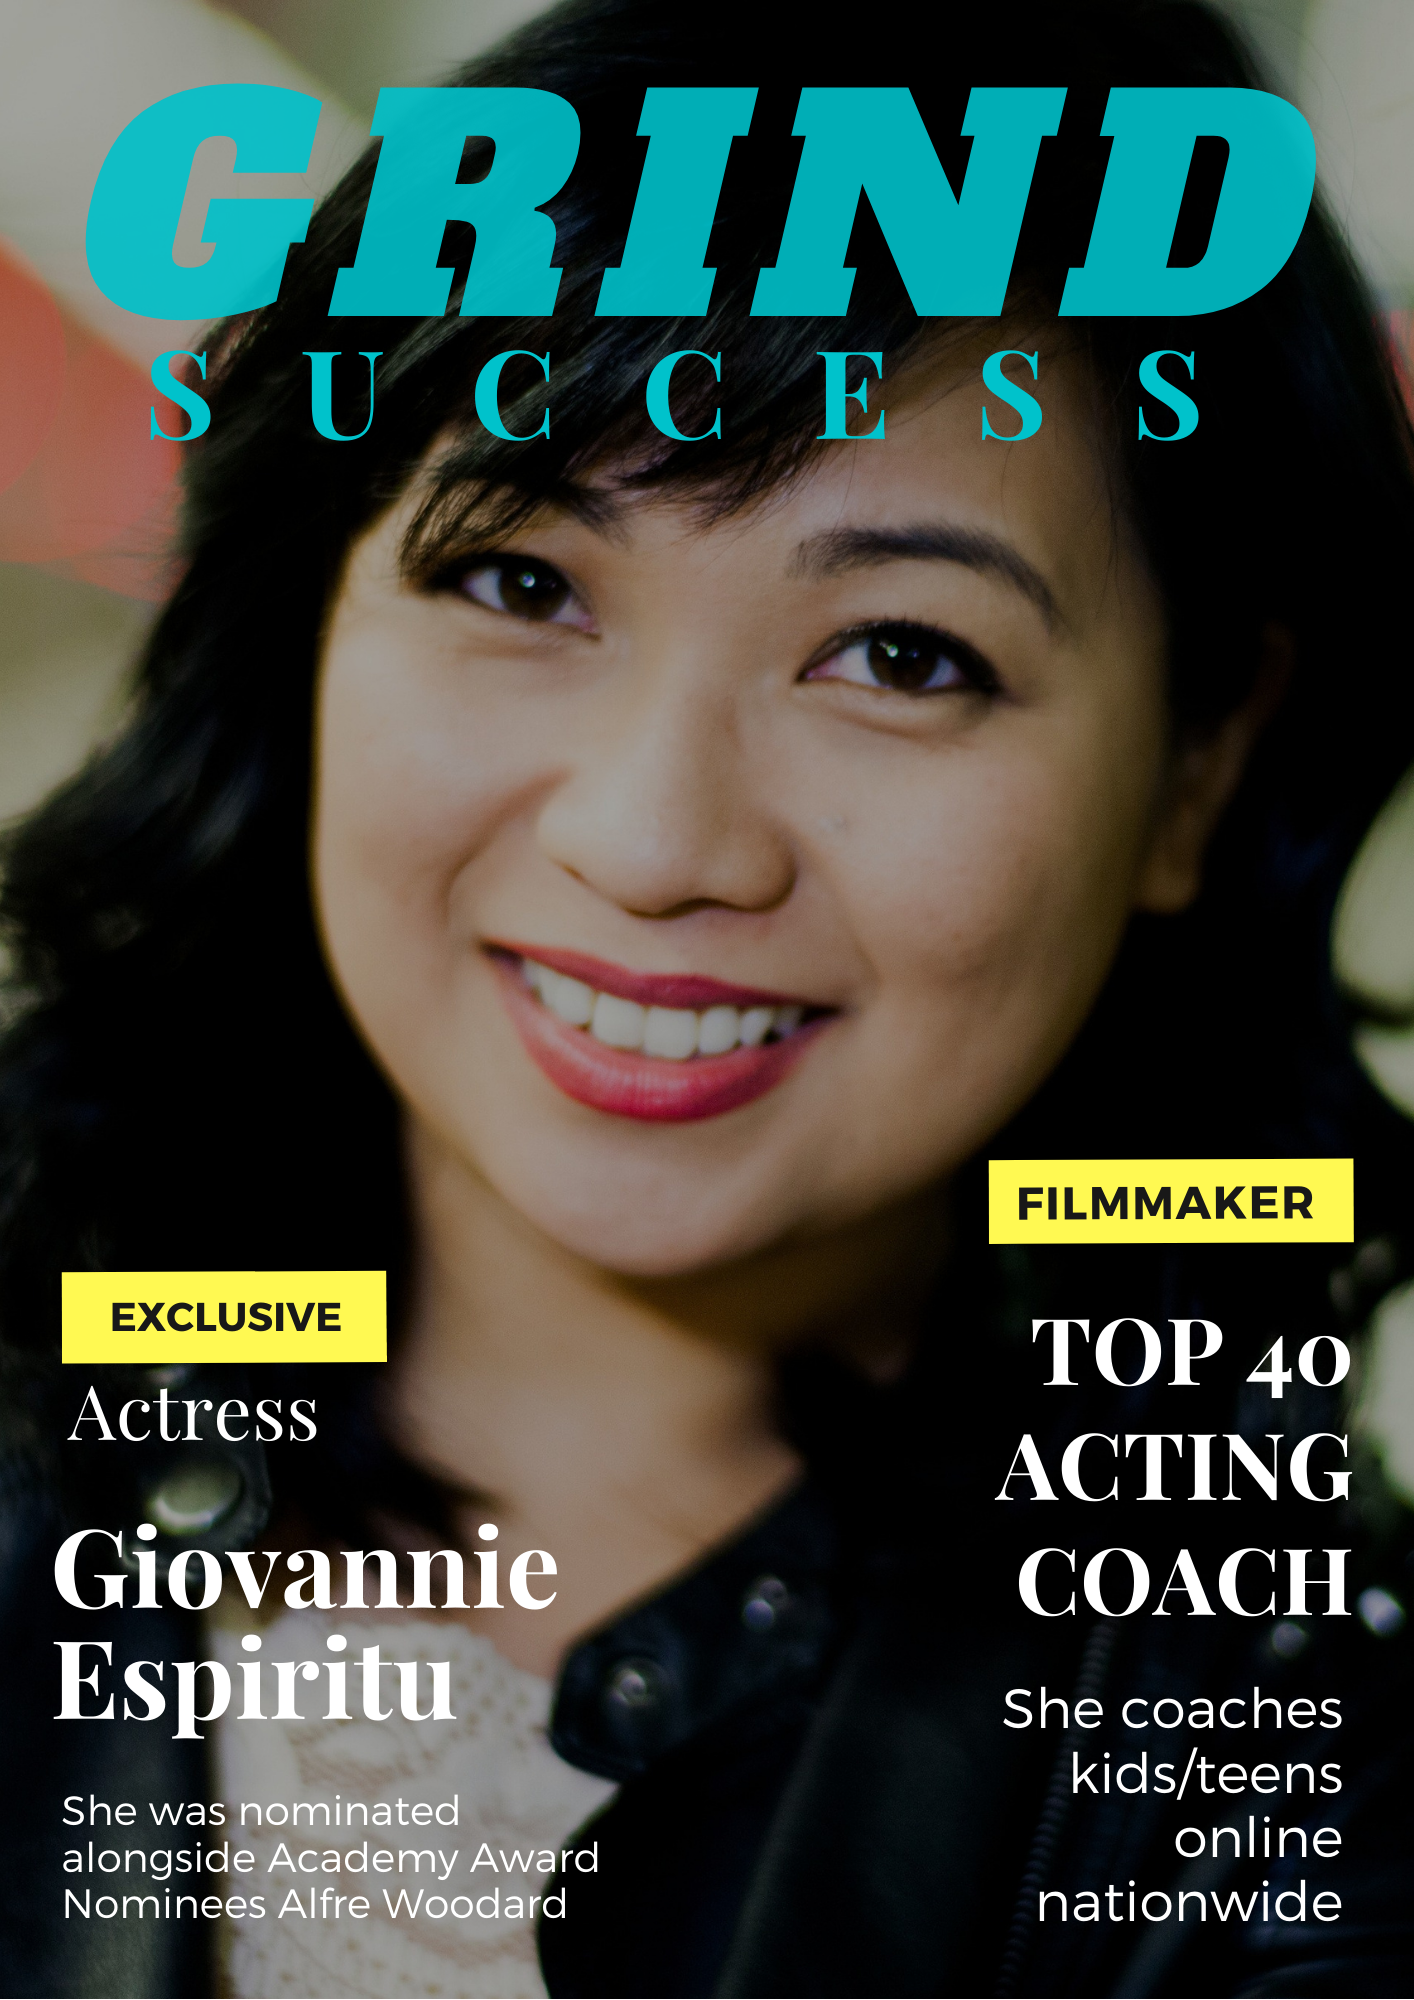 An Exclusive Interview With Giovannie Espiritu, Named a Top 40 Audition Coach in Hollywood